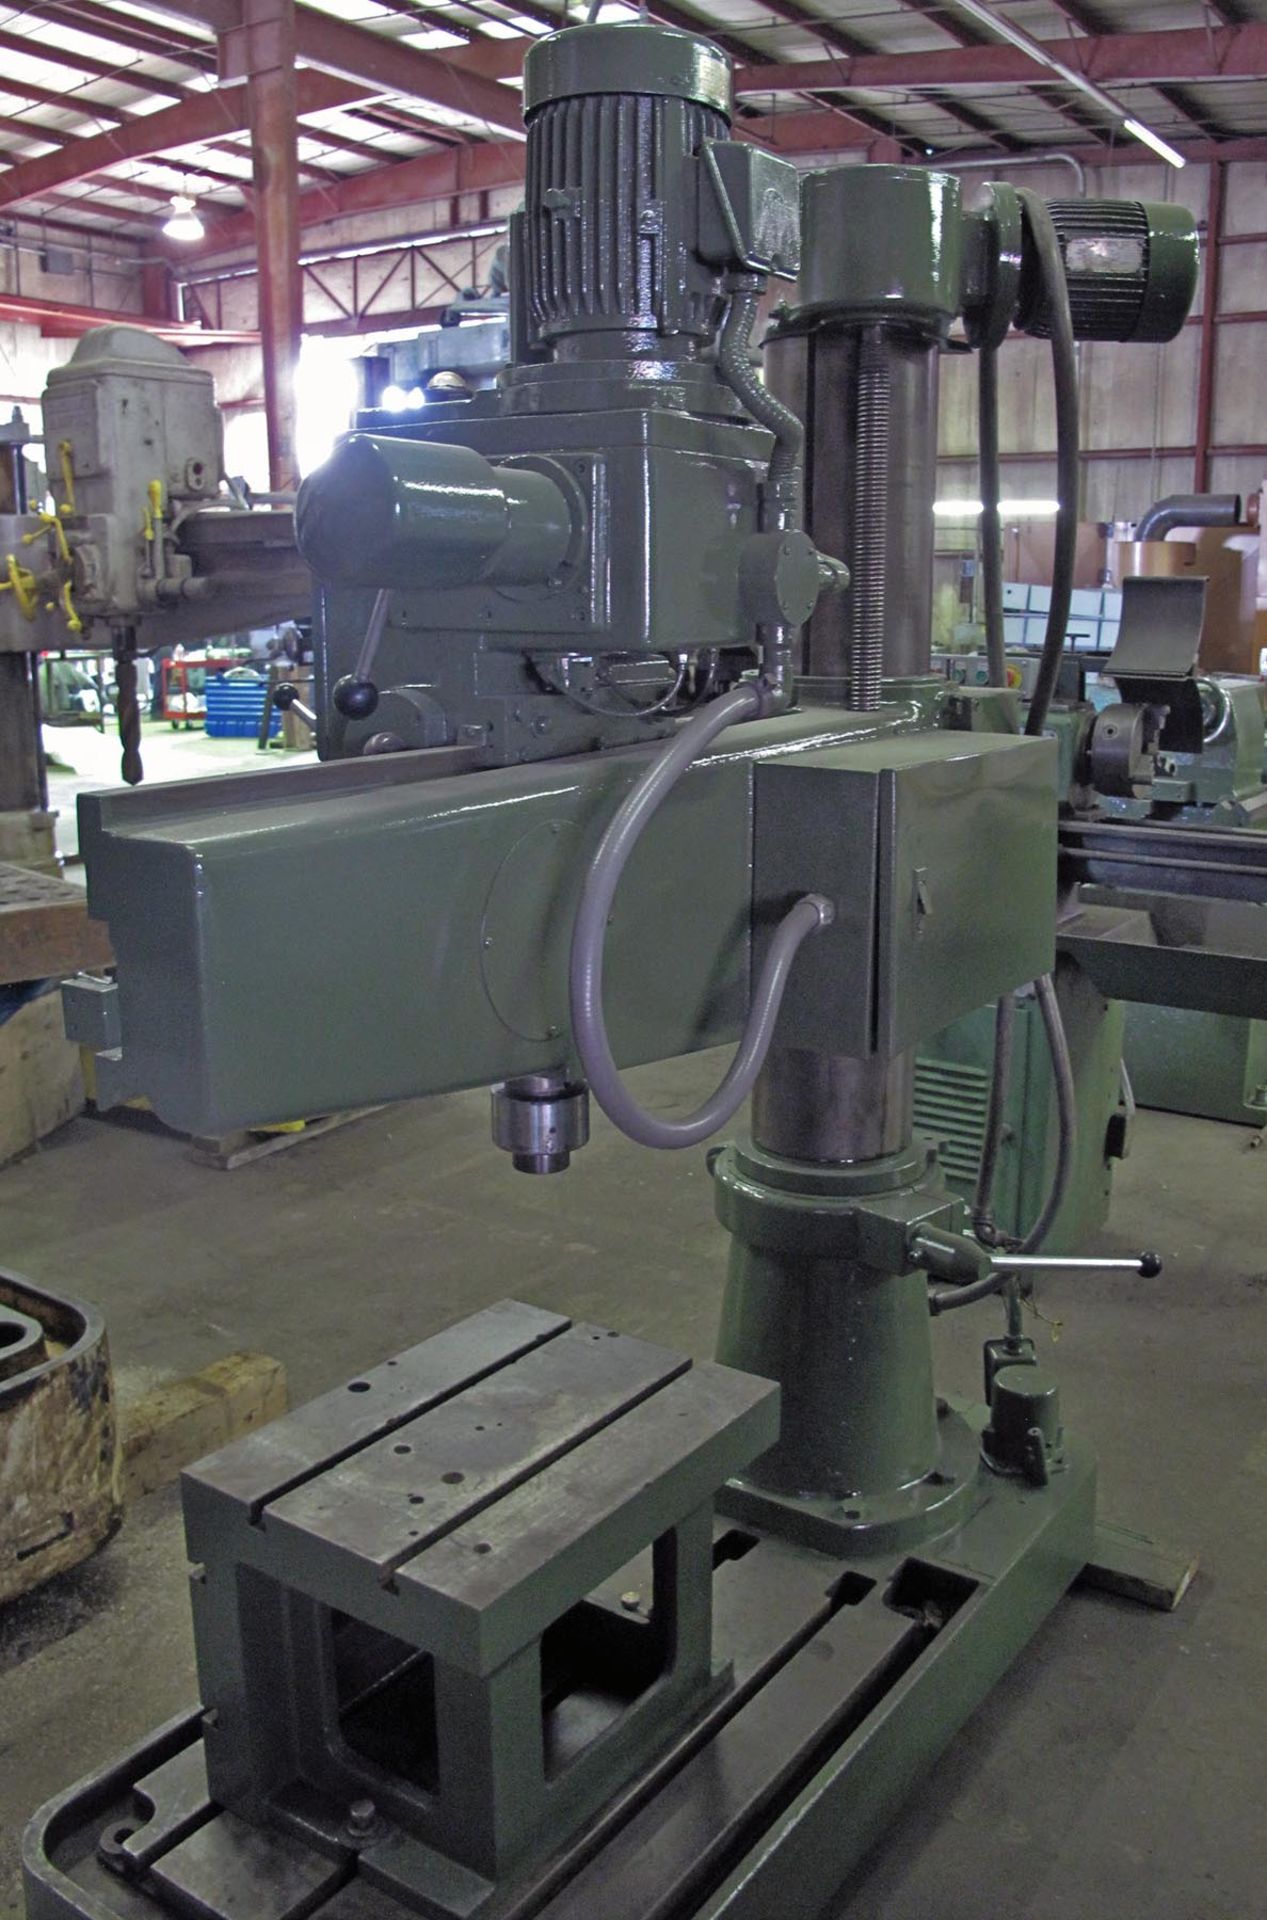 RADIAL DRILL, OOYA 3' X 9", Mdl. YMR-915, drills to center of 72"circle, 9"dia. column, 23.39"arm - Image 6 of 7